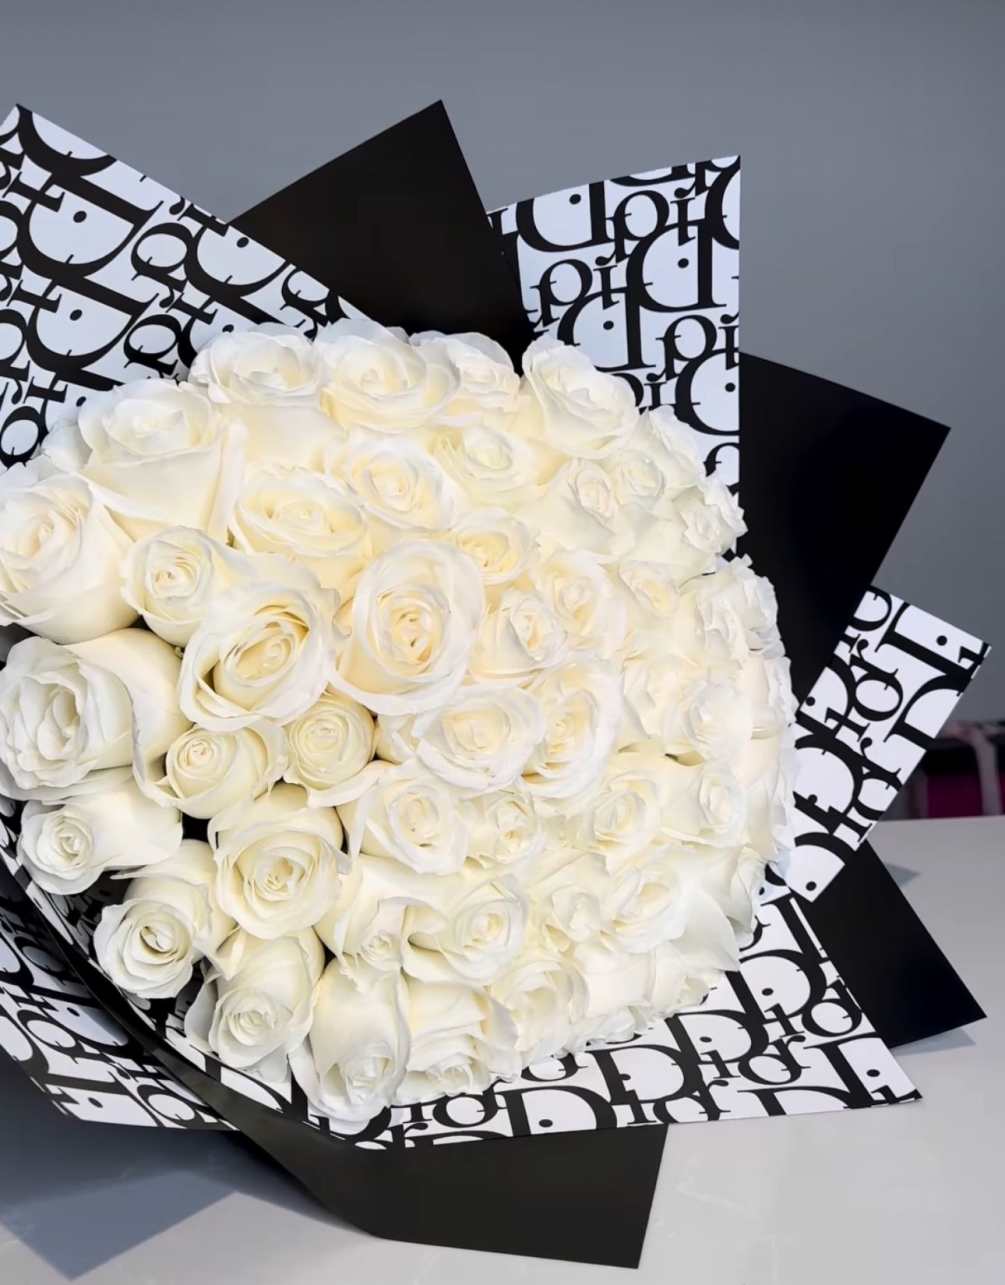 For classic romance two dozen white roses is always the perfect choice.